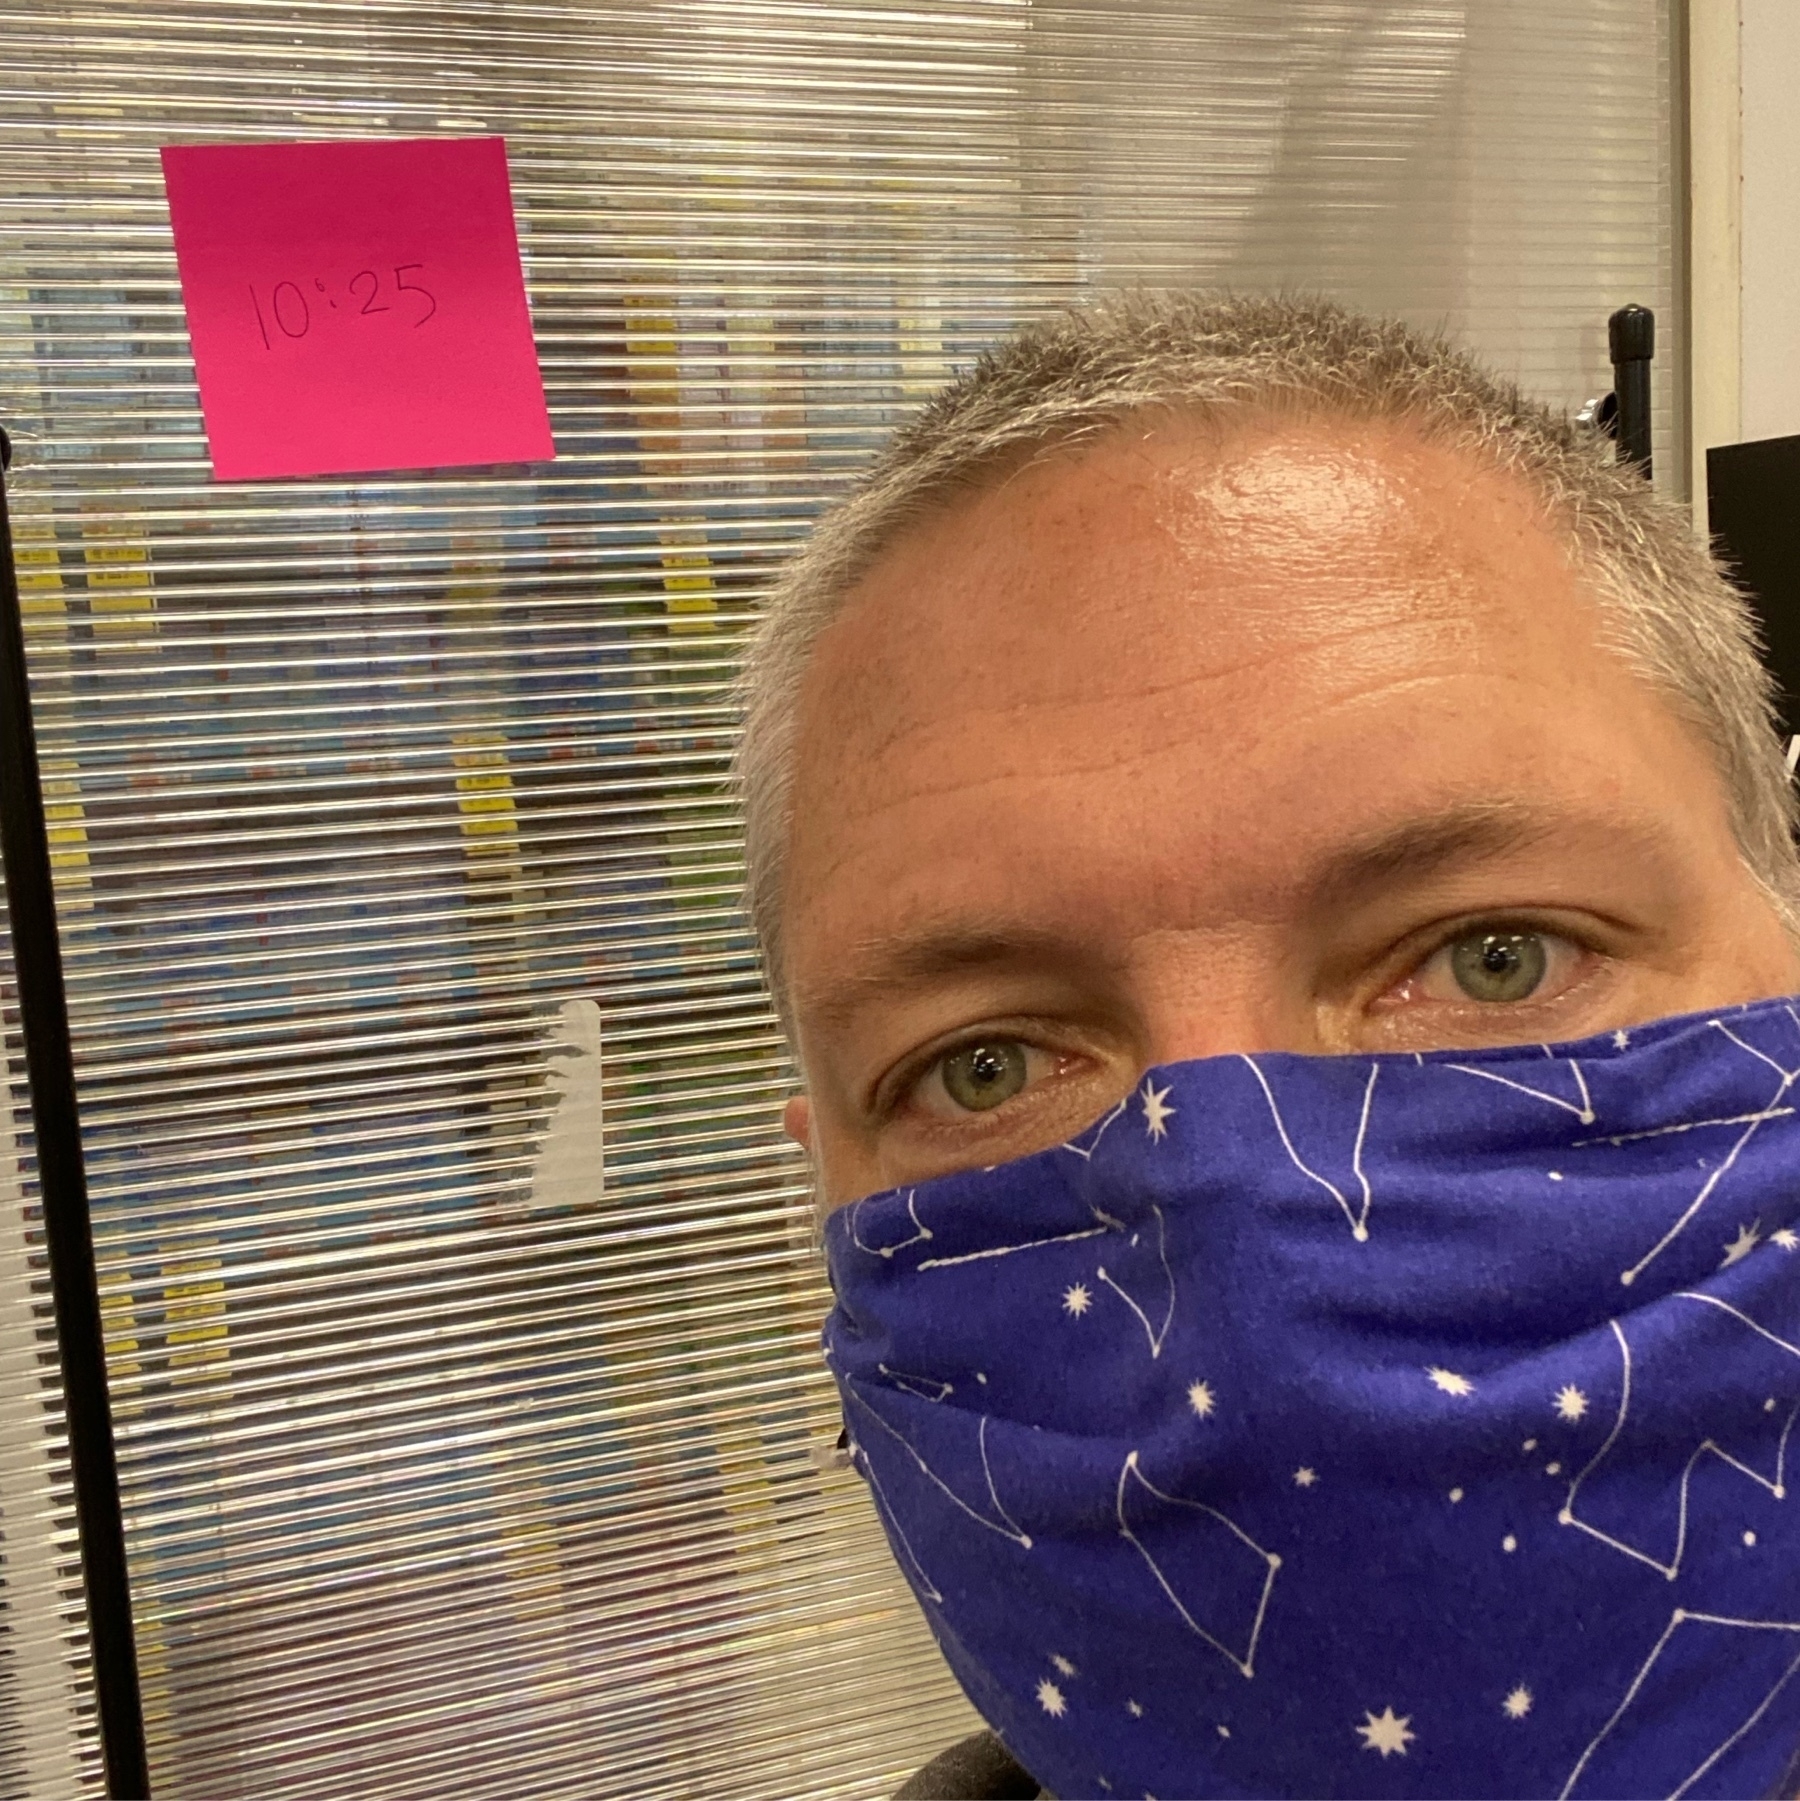 Self portrait wearing a constellation mask, beside a post-it note “10:25” in a pharmacy waiting area.